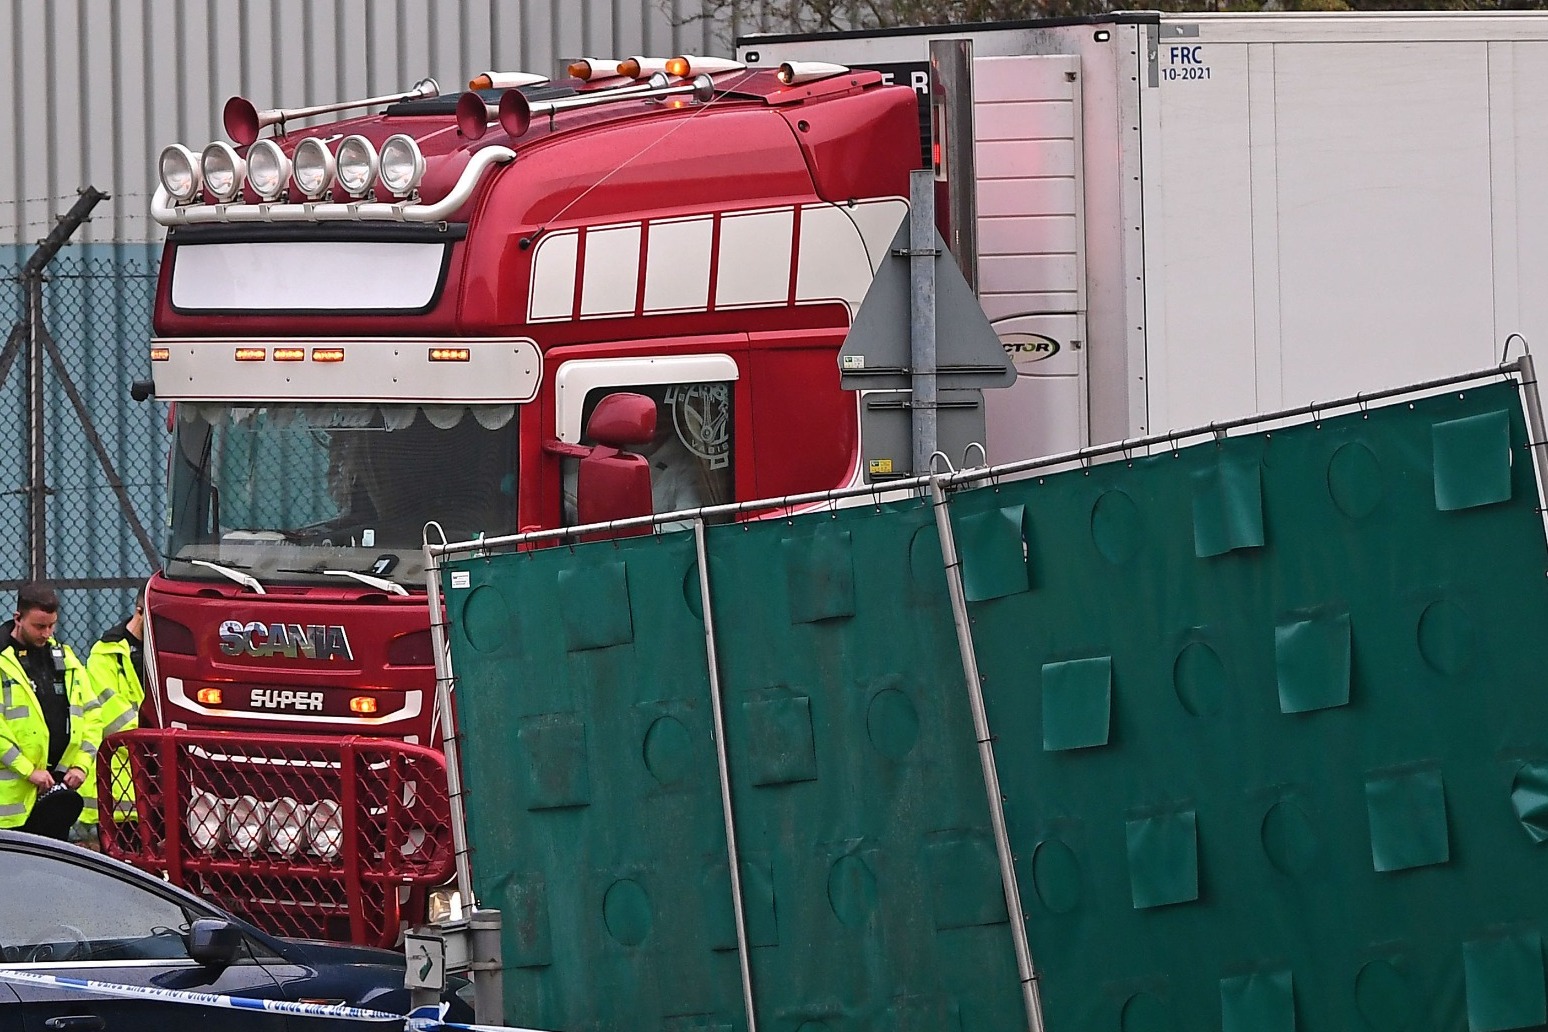 PROPERTIES SEARCHED AS PART OF LORRY DEATHS INVESTIGATION 